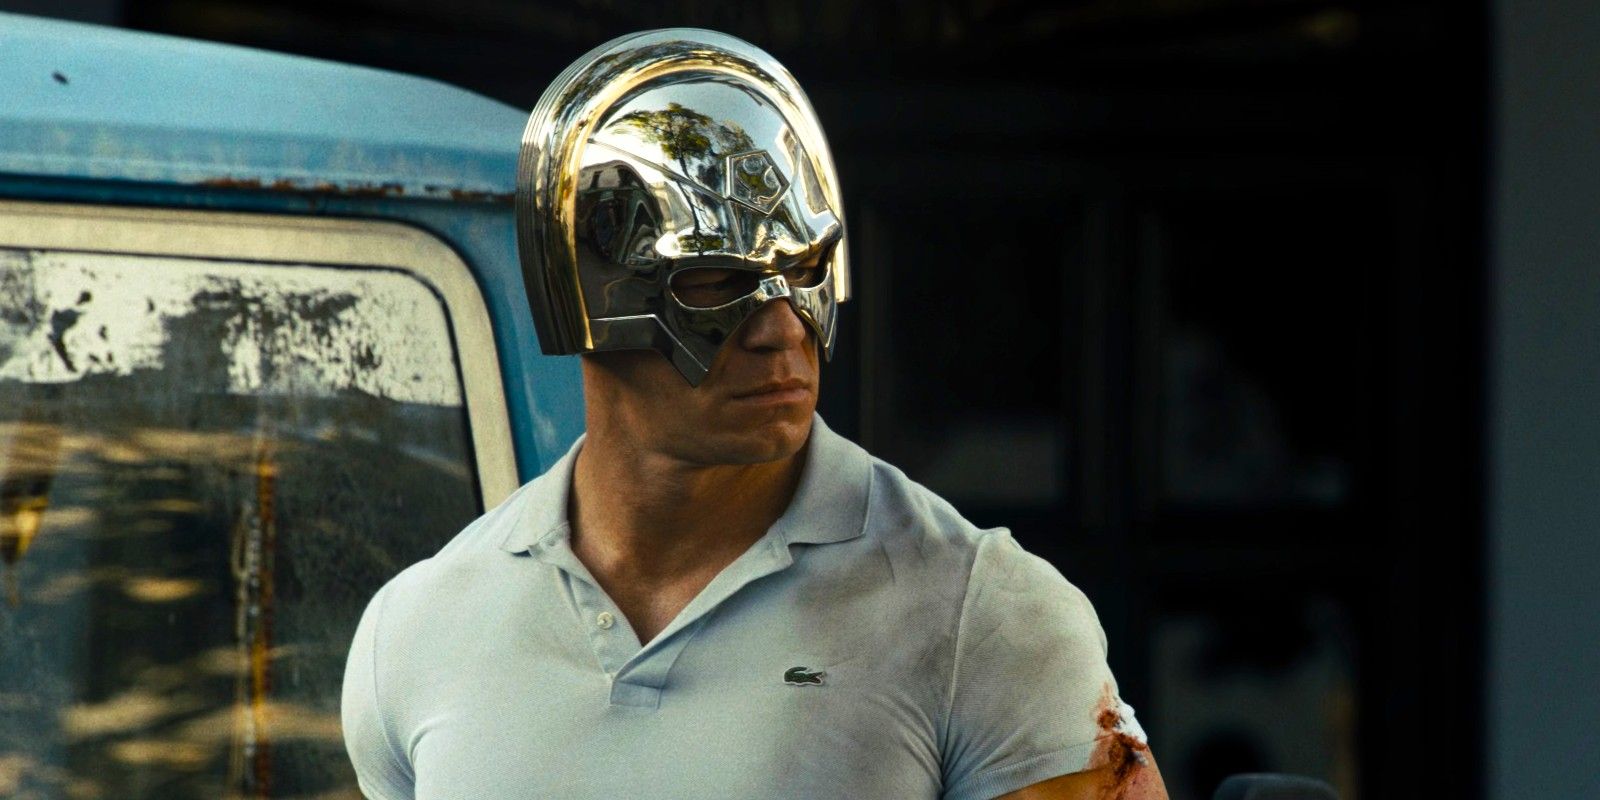 Peacemaker wears his helmet and a Lacoste polo shirt in The Suicide Squad 